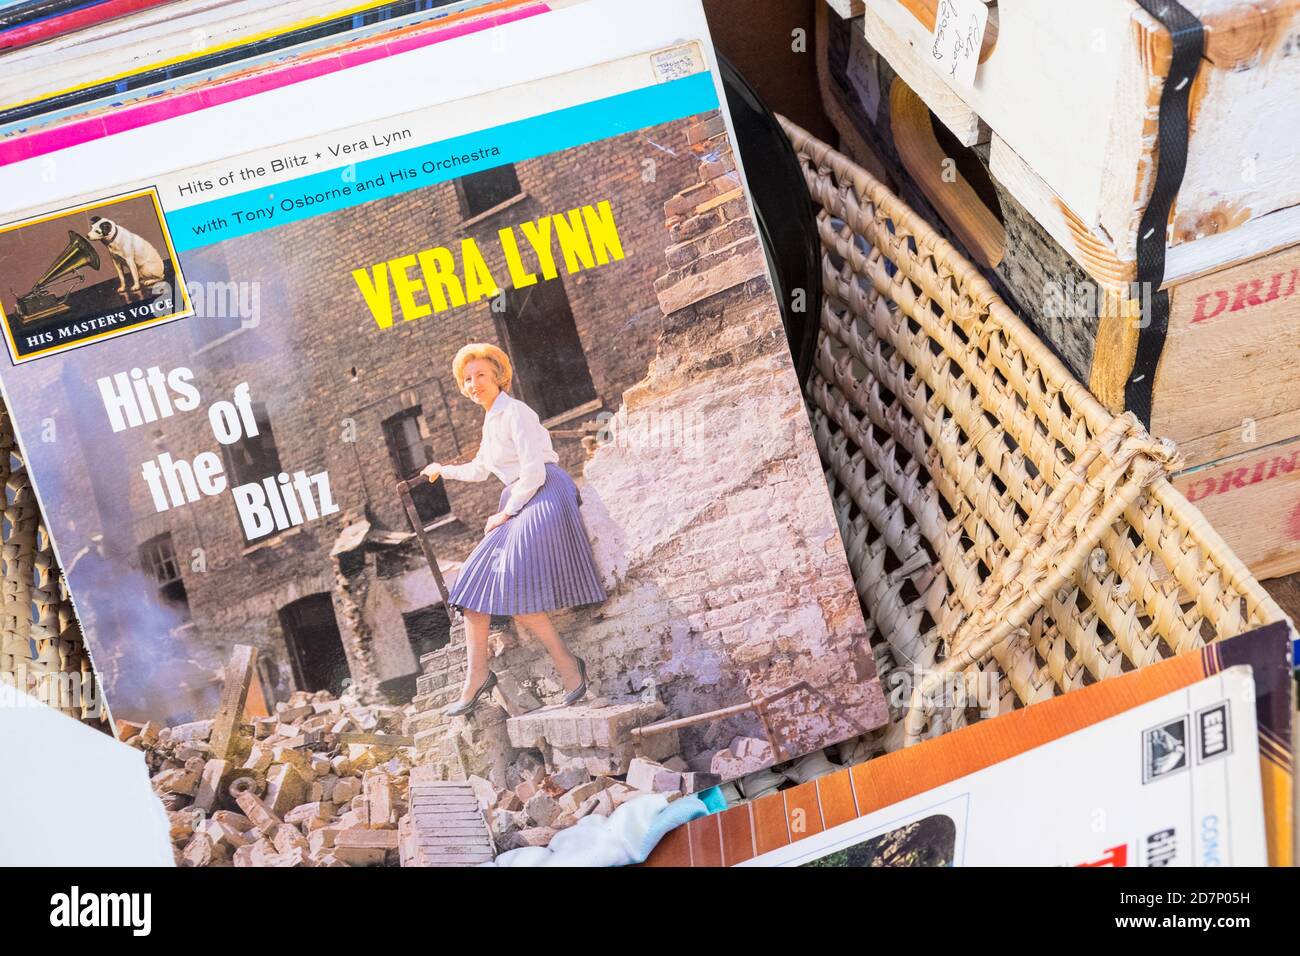 National treasure,Dame Vera Lynn,Vera Lynn,Hits of the  Blitz,Blitz,album,vinyl,record,records,HMV,His Masters  Voice,label,for,sale,at,this,record  collectors,shop,stall,within,Interior,of,indoor,indoors,covered,Cardigan  Guildhall Market,Cardigan Market ...